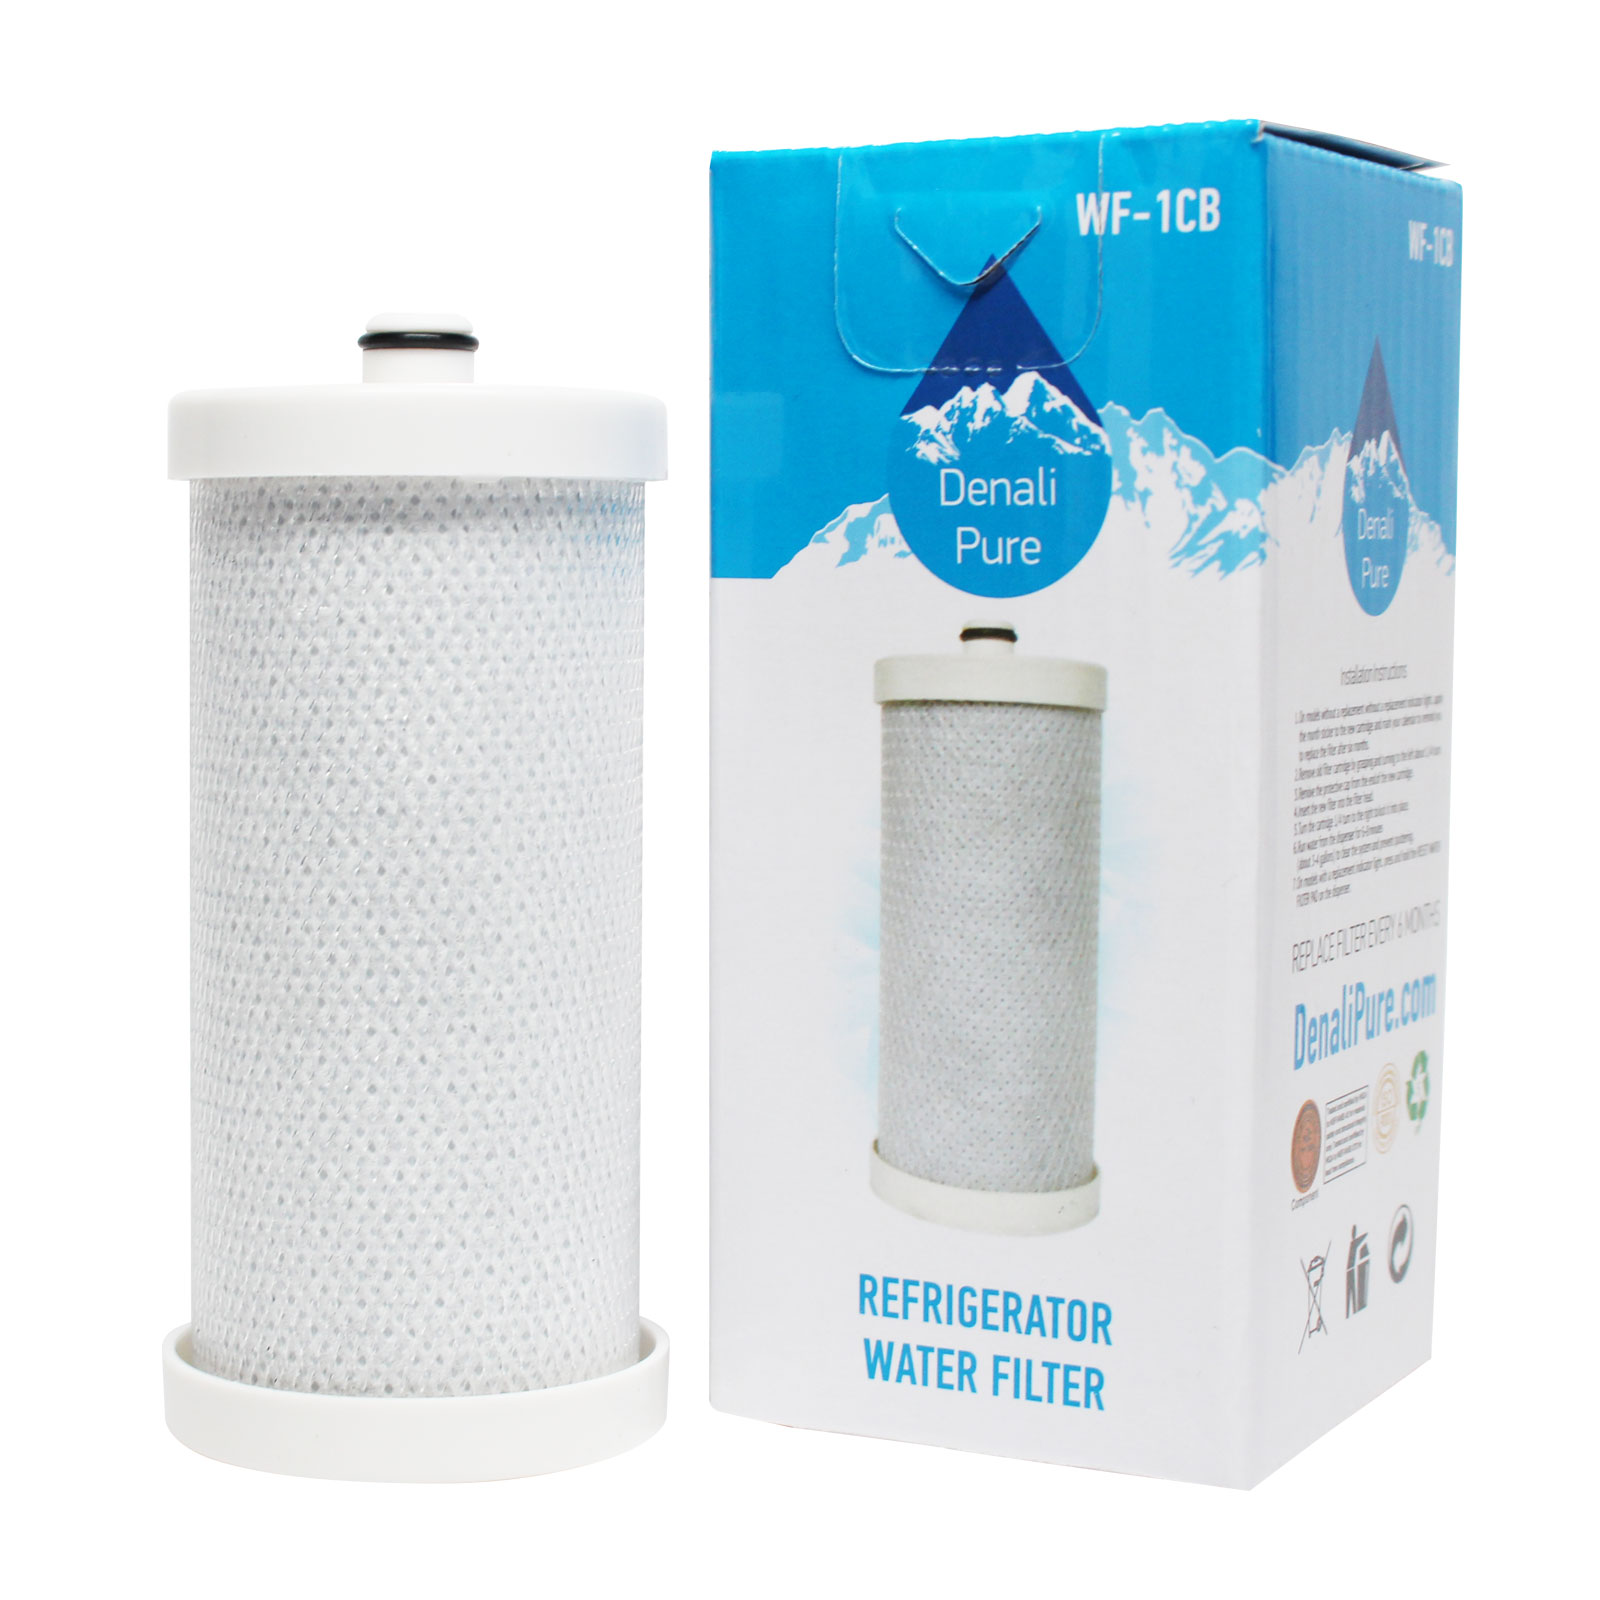 4-Pack Compatible with Frigidaire FRS6HR45KS4 Refrigerator Water Filter - Compatible with Frigidaire WF1CB, WFCB Fridge Water Filter Cartridge - image 2 of 4